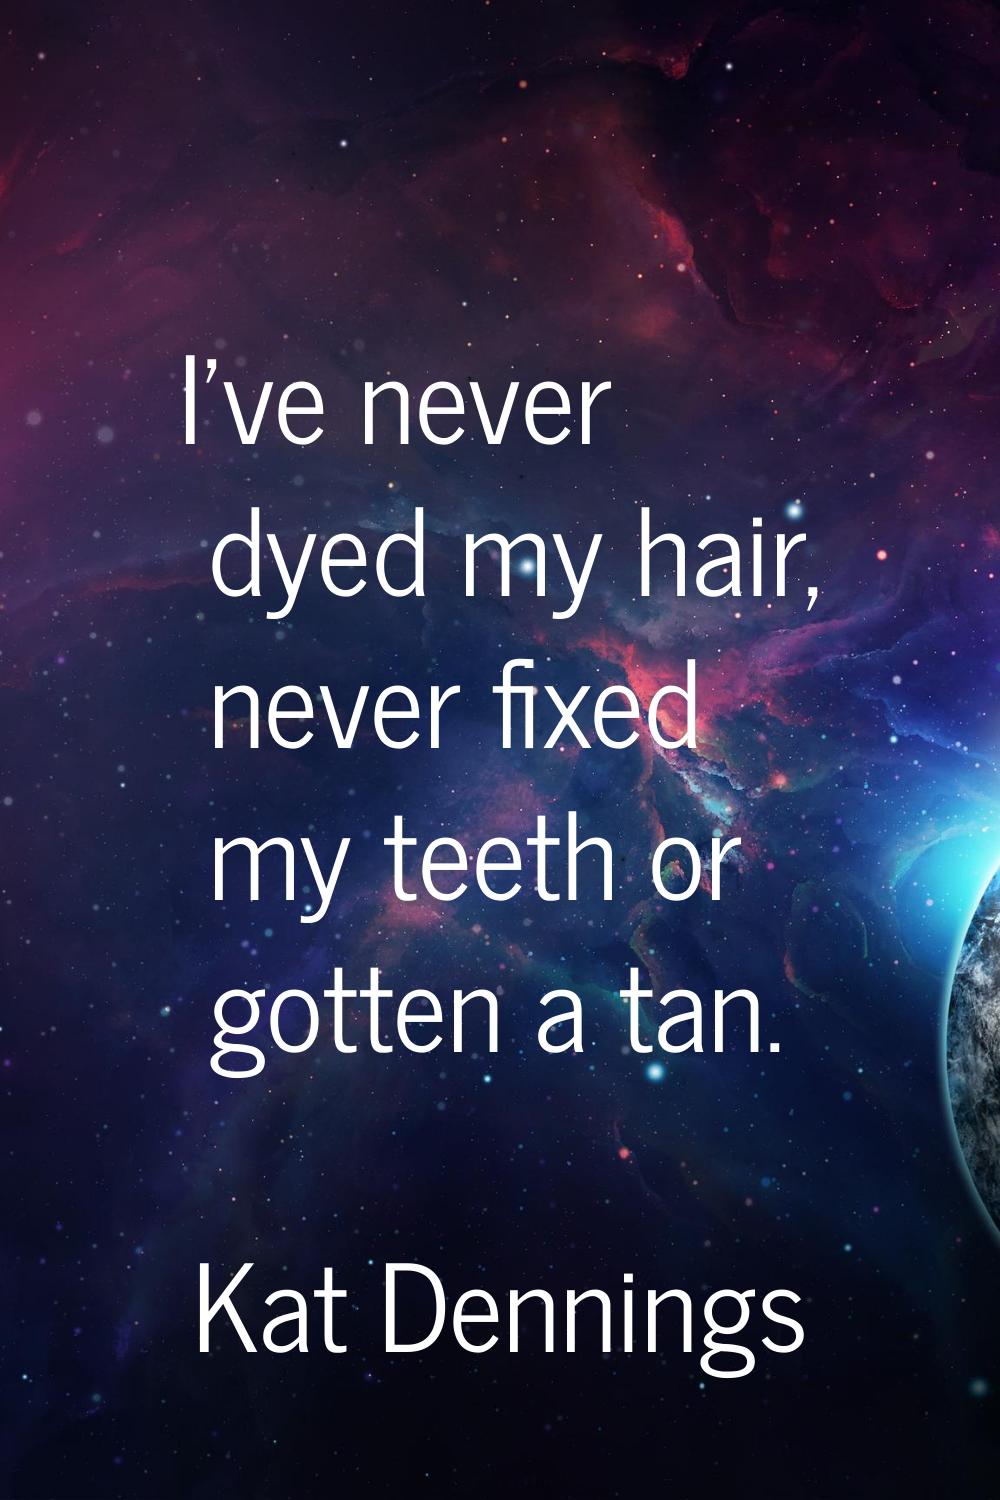 I've never dyed my hair, never fixed my teeth or gotten a tan.